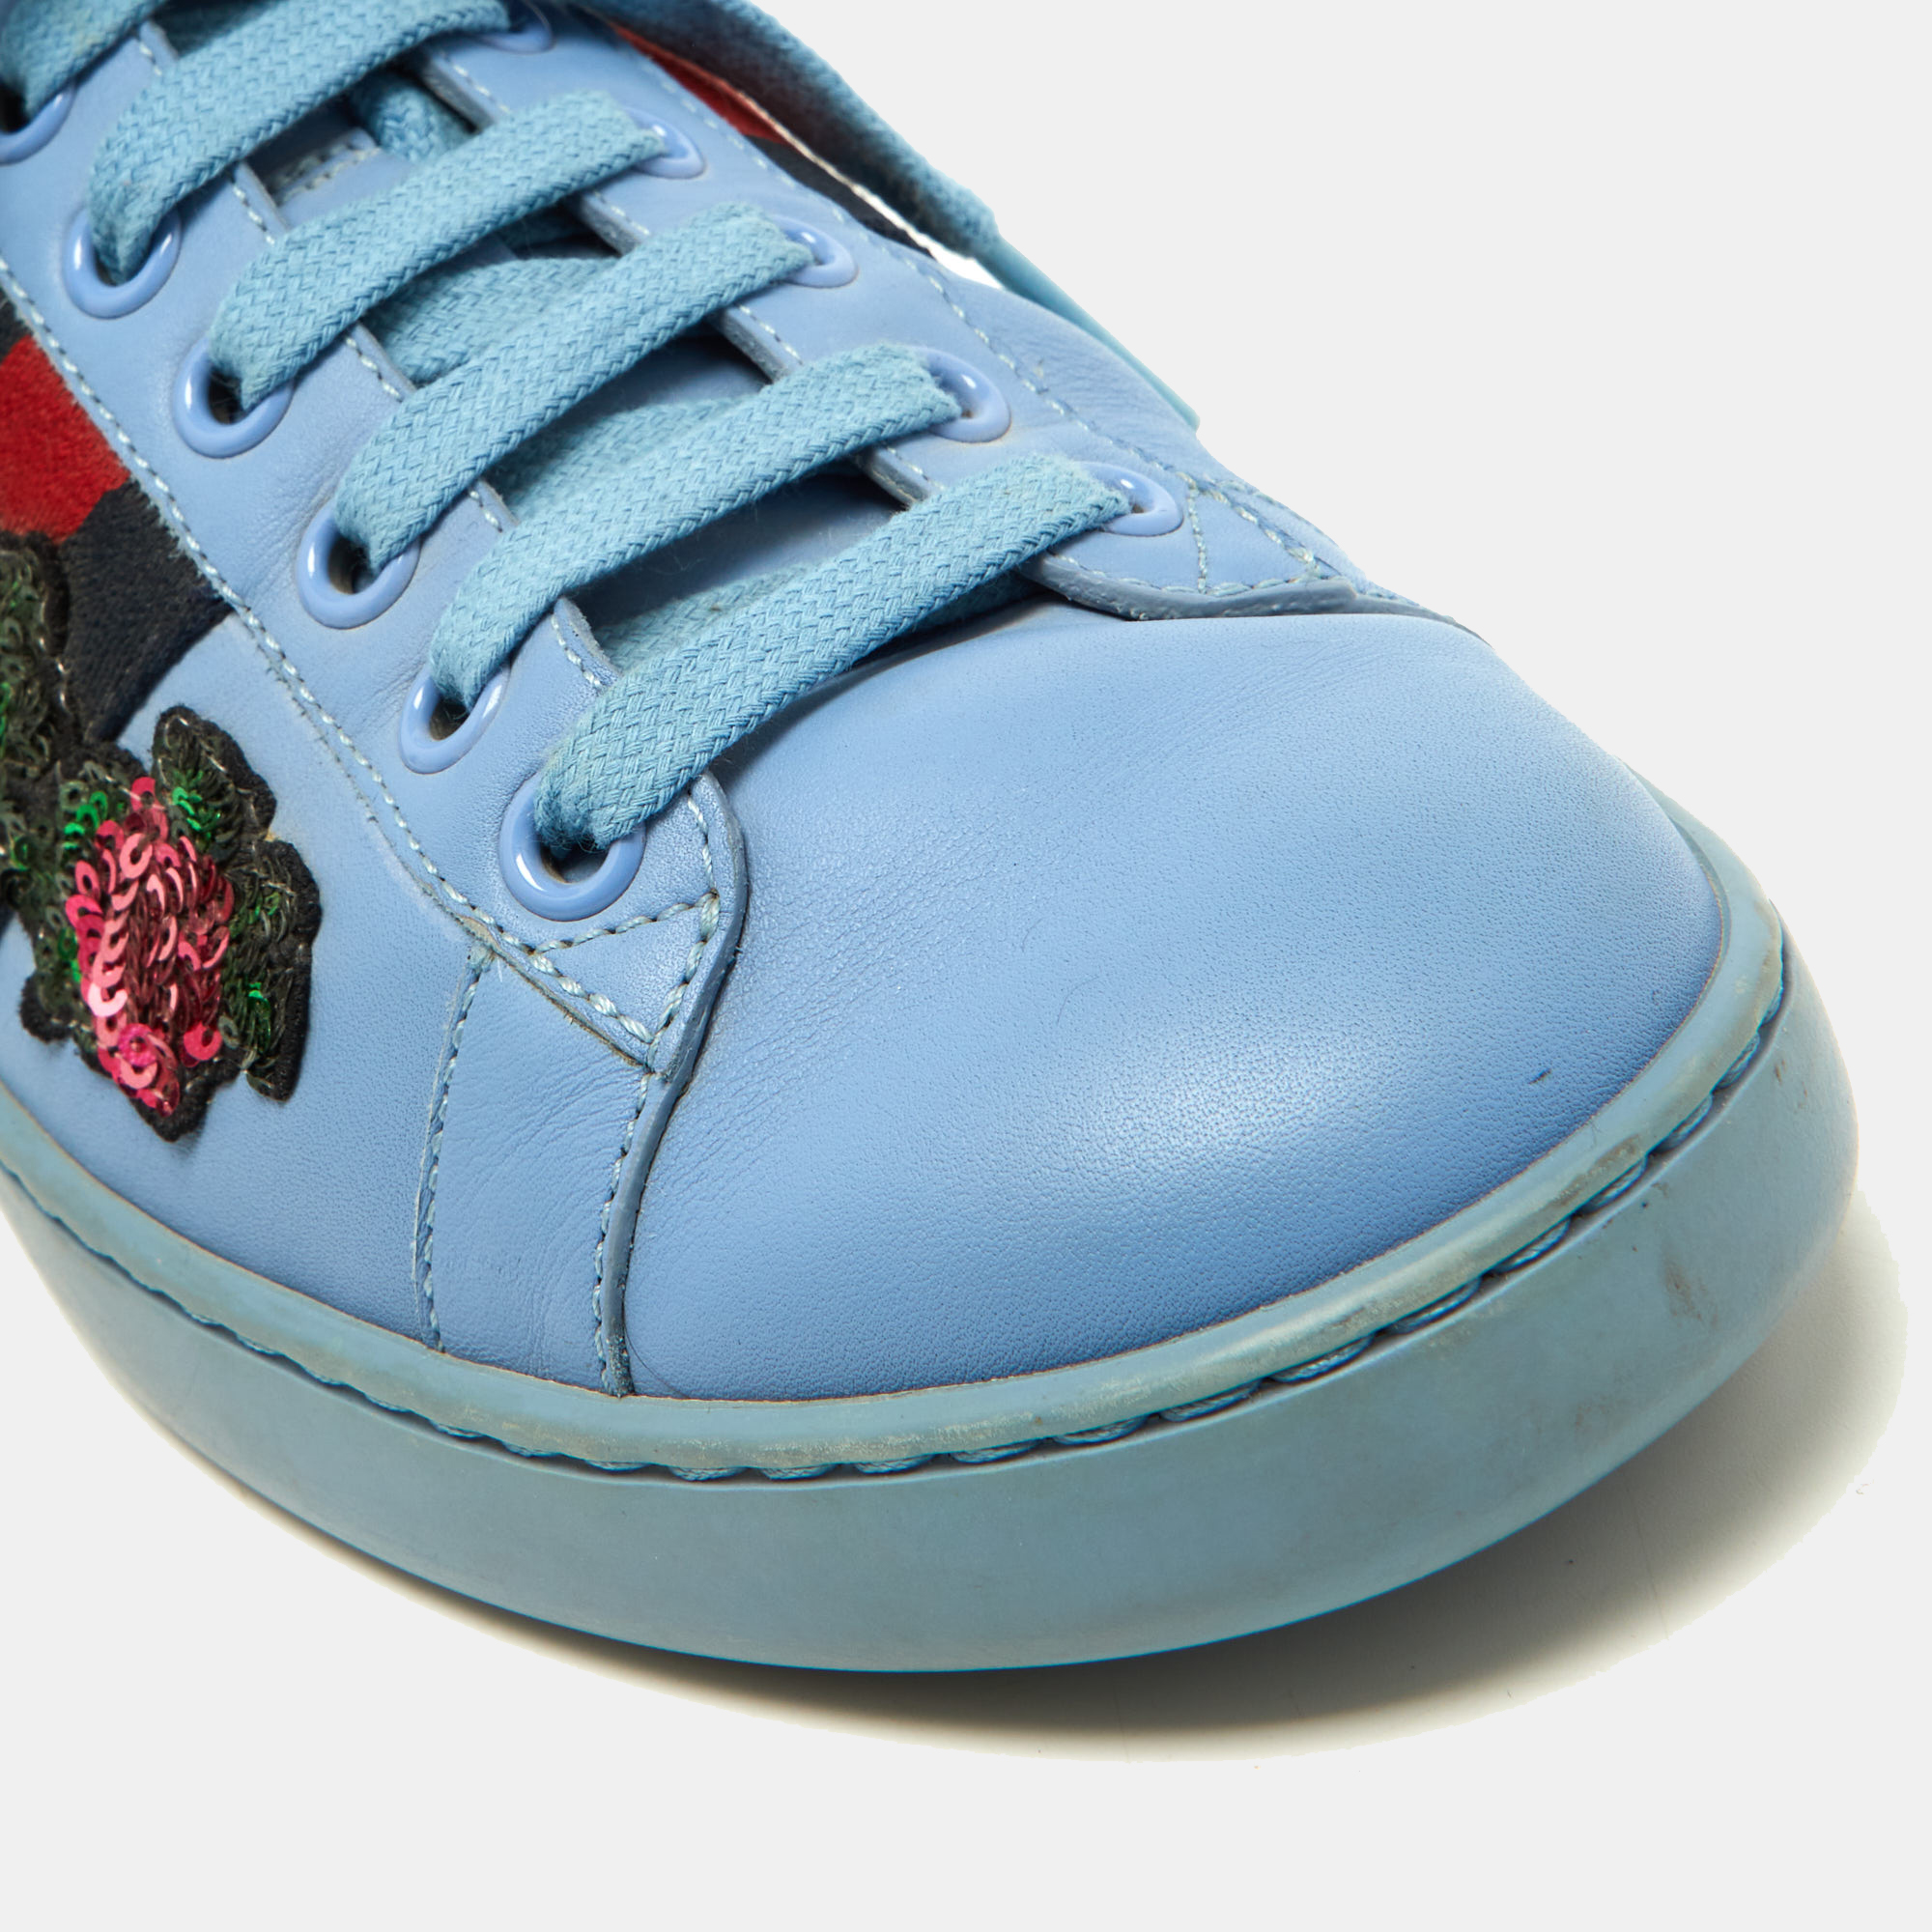 Gucci Blue Leather Flower Sequins Embellished Ace Low Top Sneakers Size 36